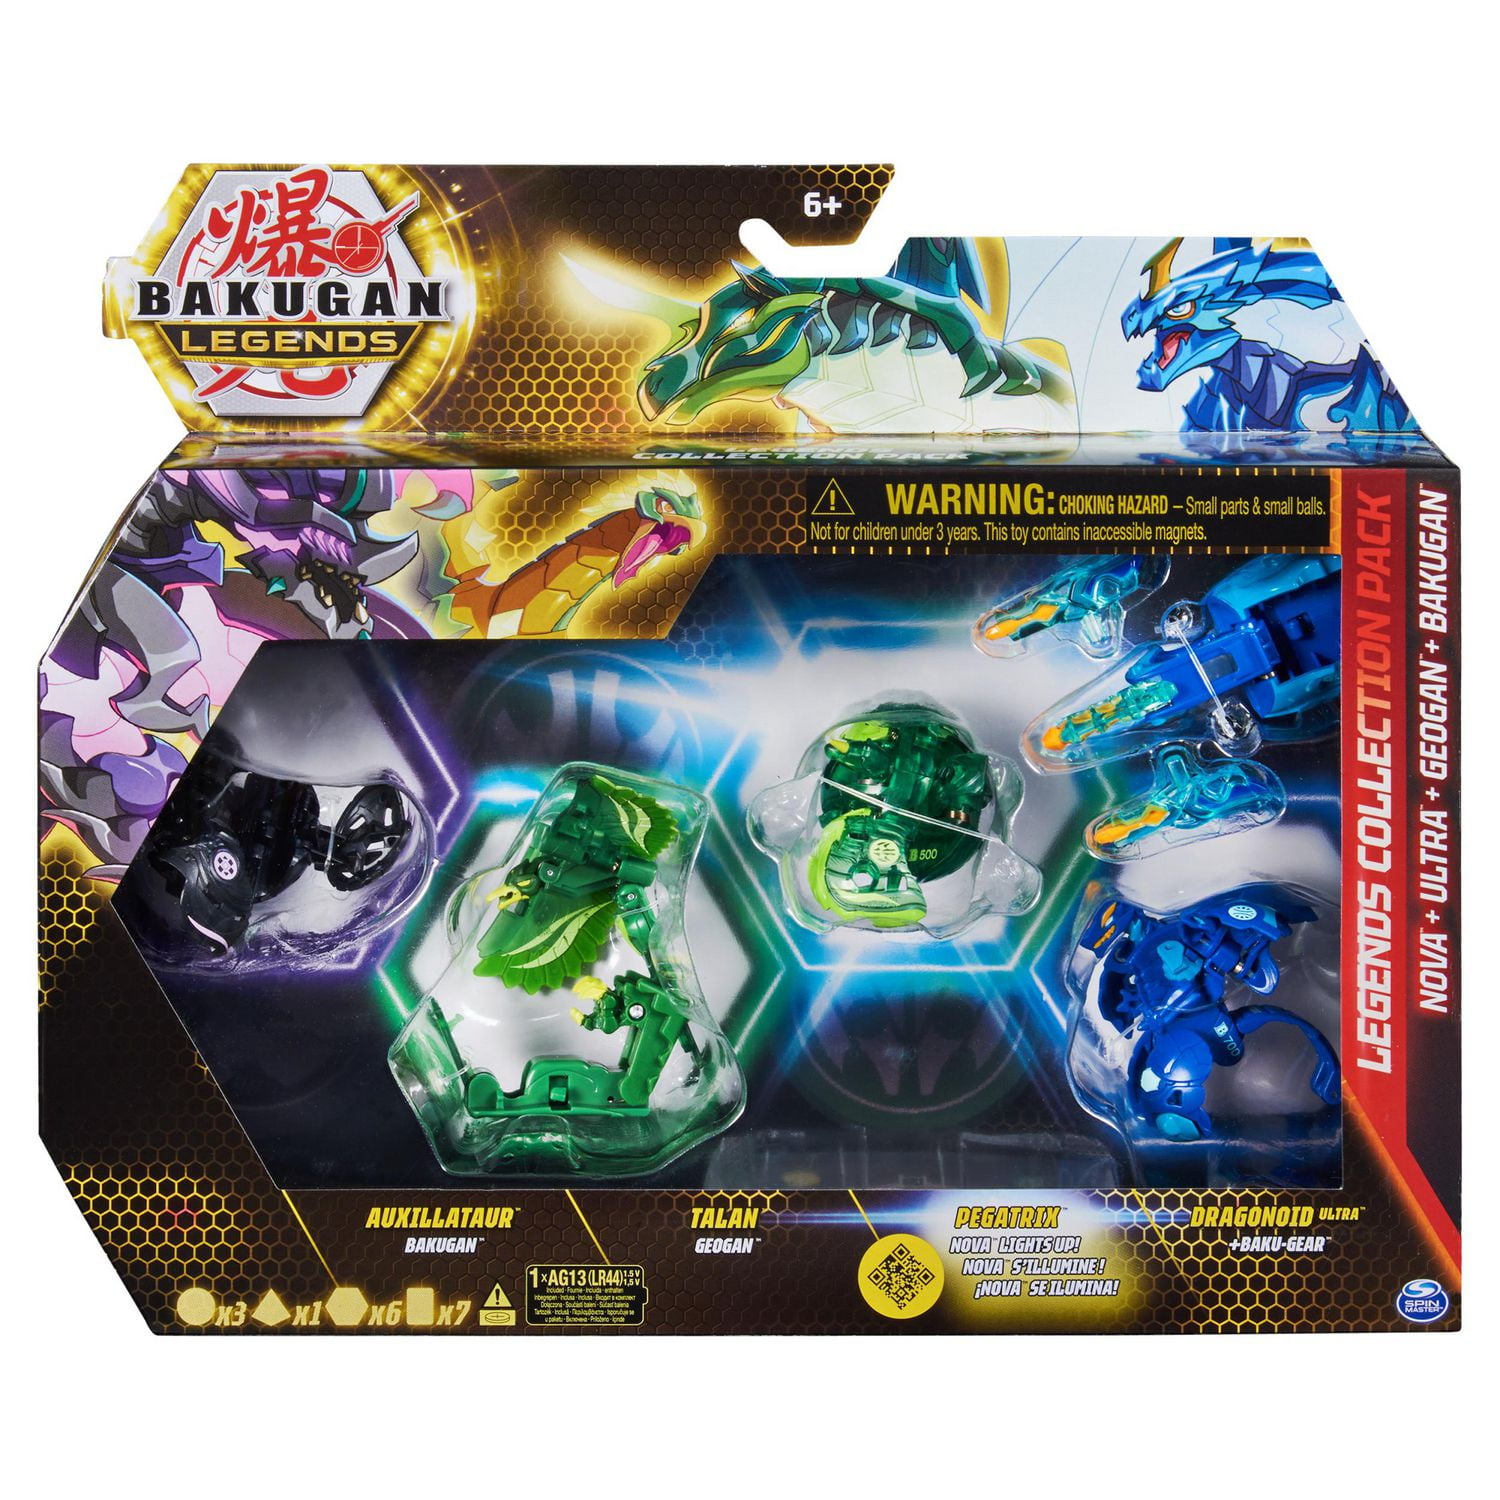 Bakugan Evolutions, UNbox and Brawl Pack with 6 Exclusive Bakugan,  BakuCores, Collectible Bakugan Cards, Gate Cards, Kids Toys for Boys Ages 6  and Up